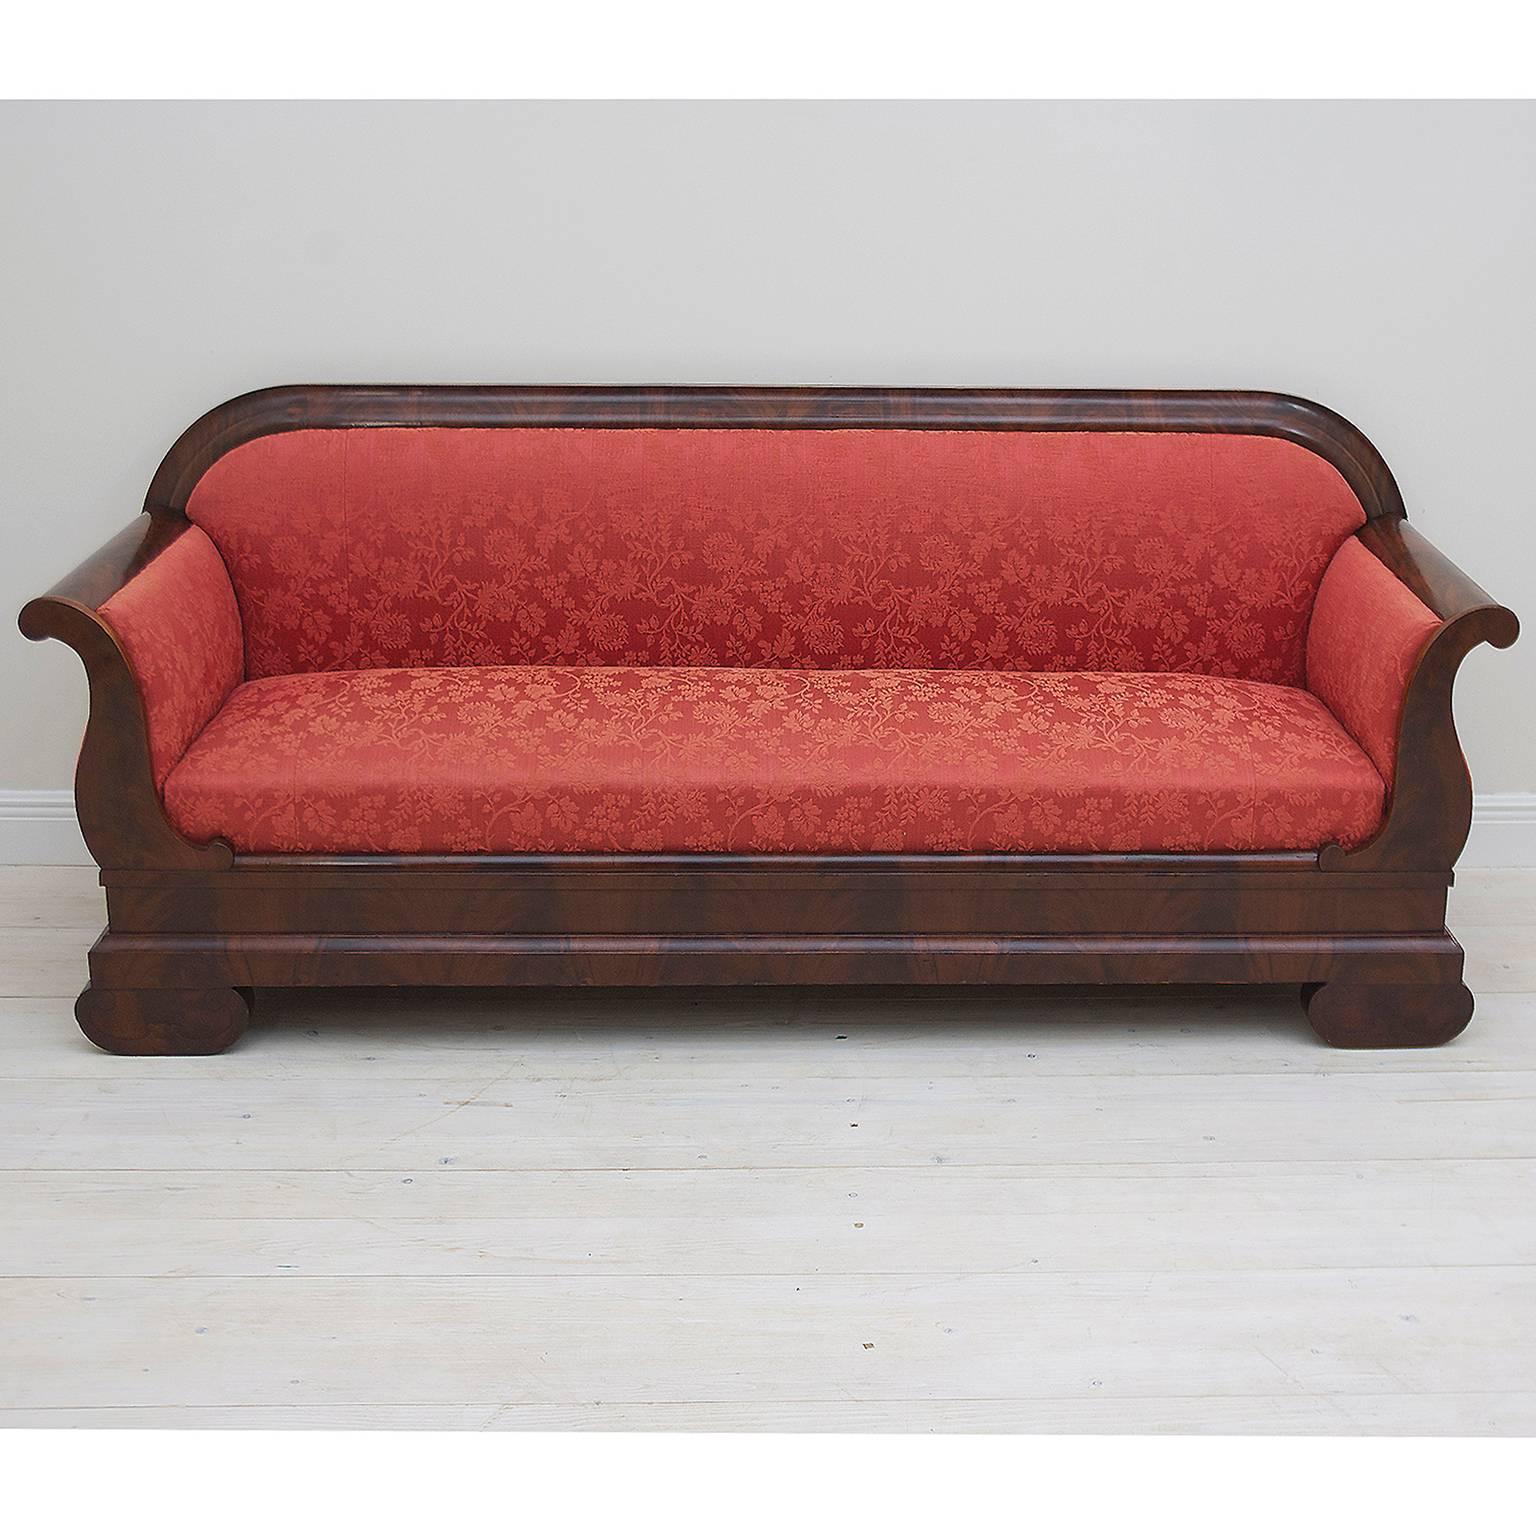 A very beautiful and elegant American Empire sleigh-sofa attributable to well-known NYC cabinet-maker J. and J. W. Meeks with original finish over expertly bookmatched mahogany veneer and hand-dovetailed case, New York City, circa 1835. Sofa has